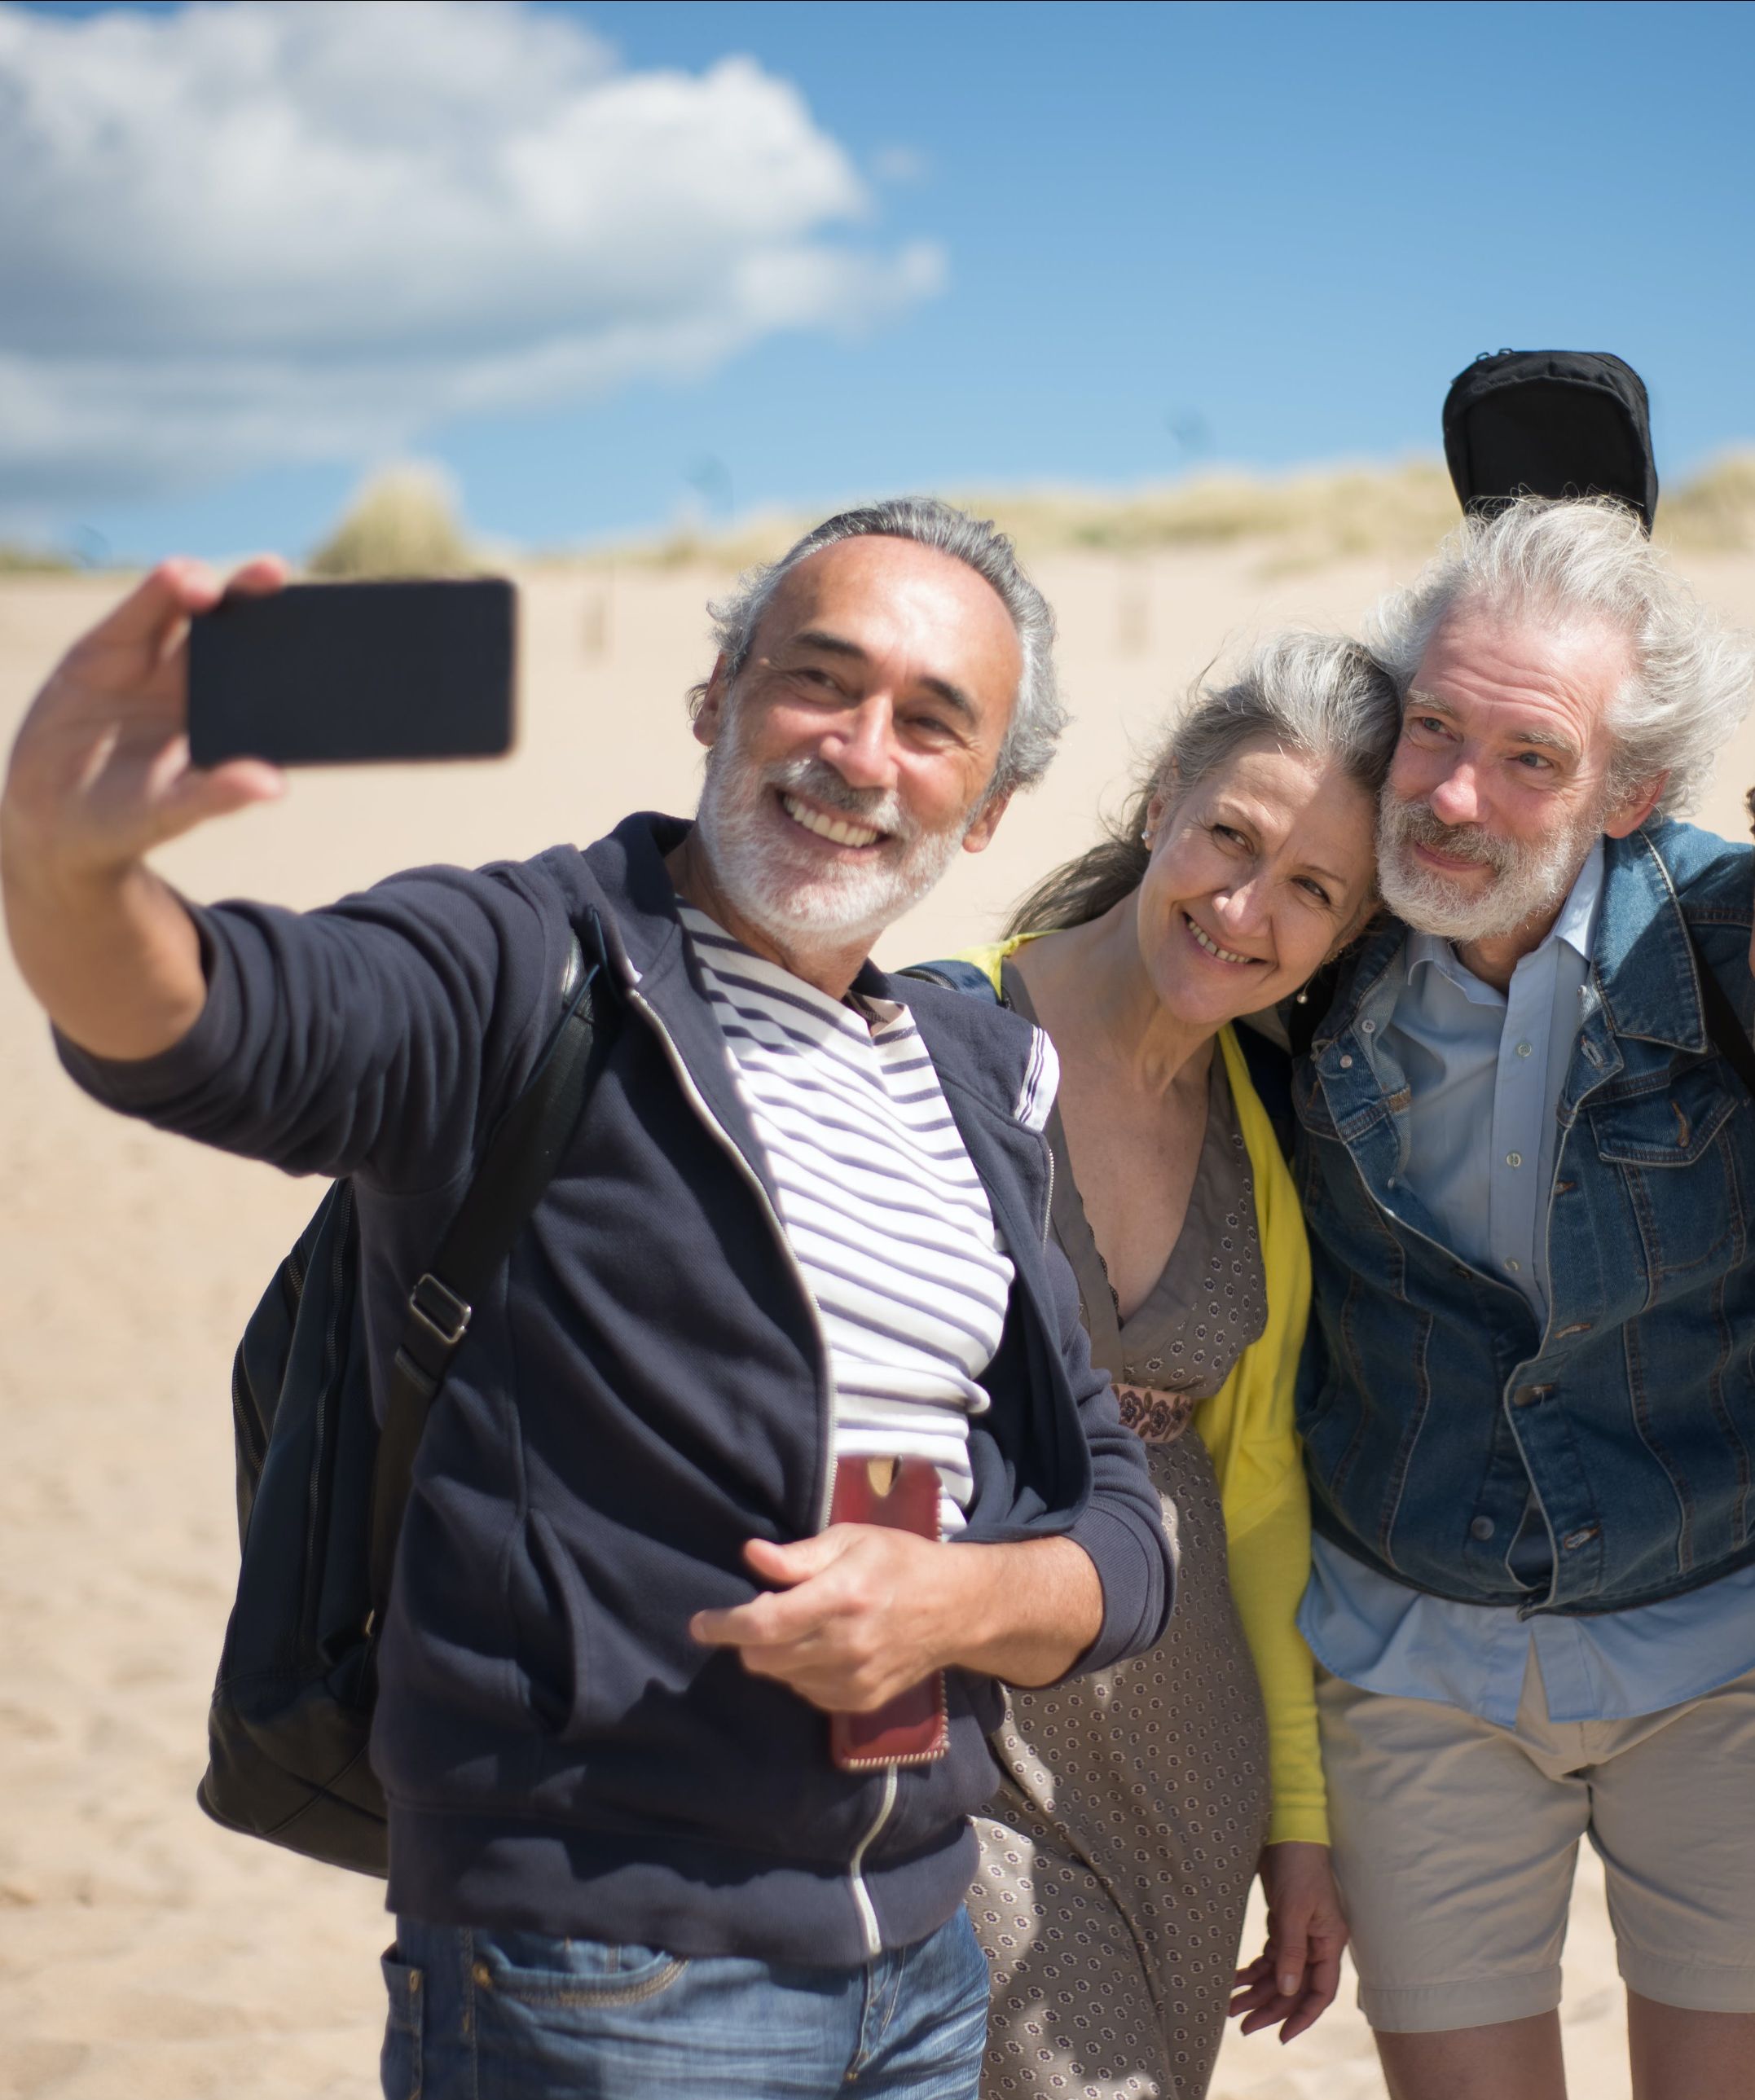 Social media could be the key to connecting with baby boomers